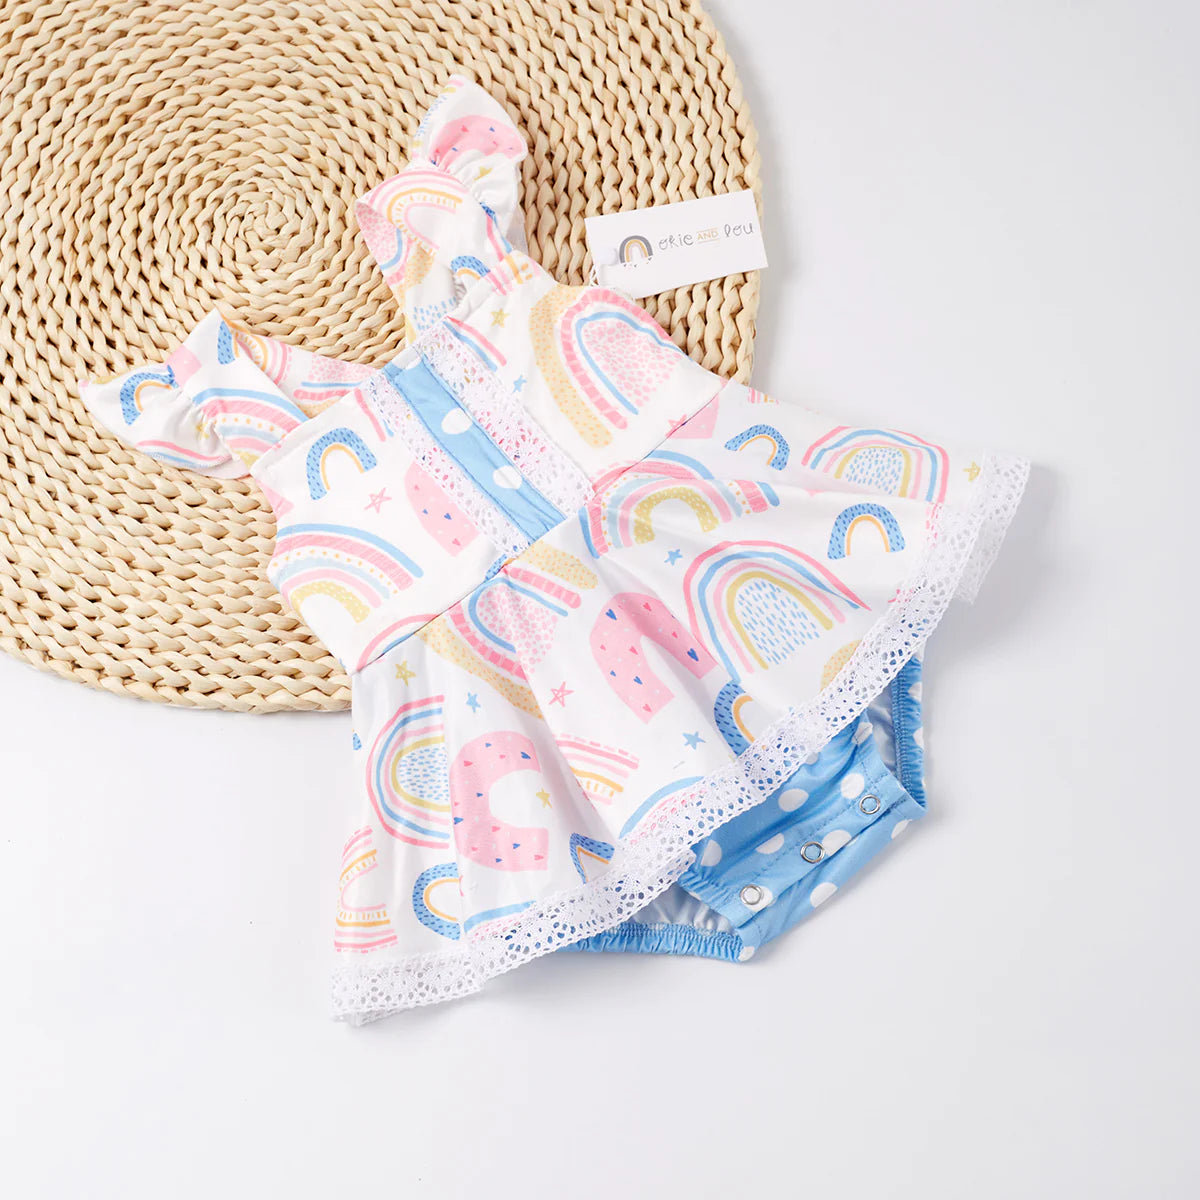 Over the Rainbow Infant Romper by Okie & Lou